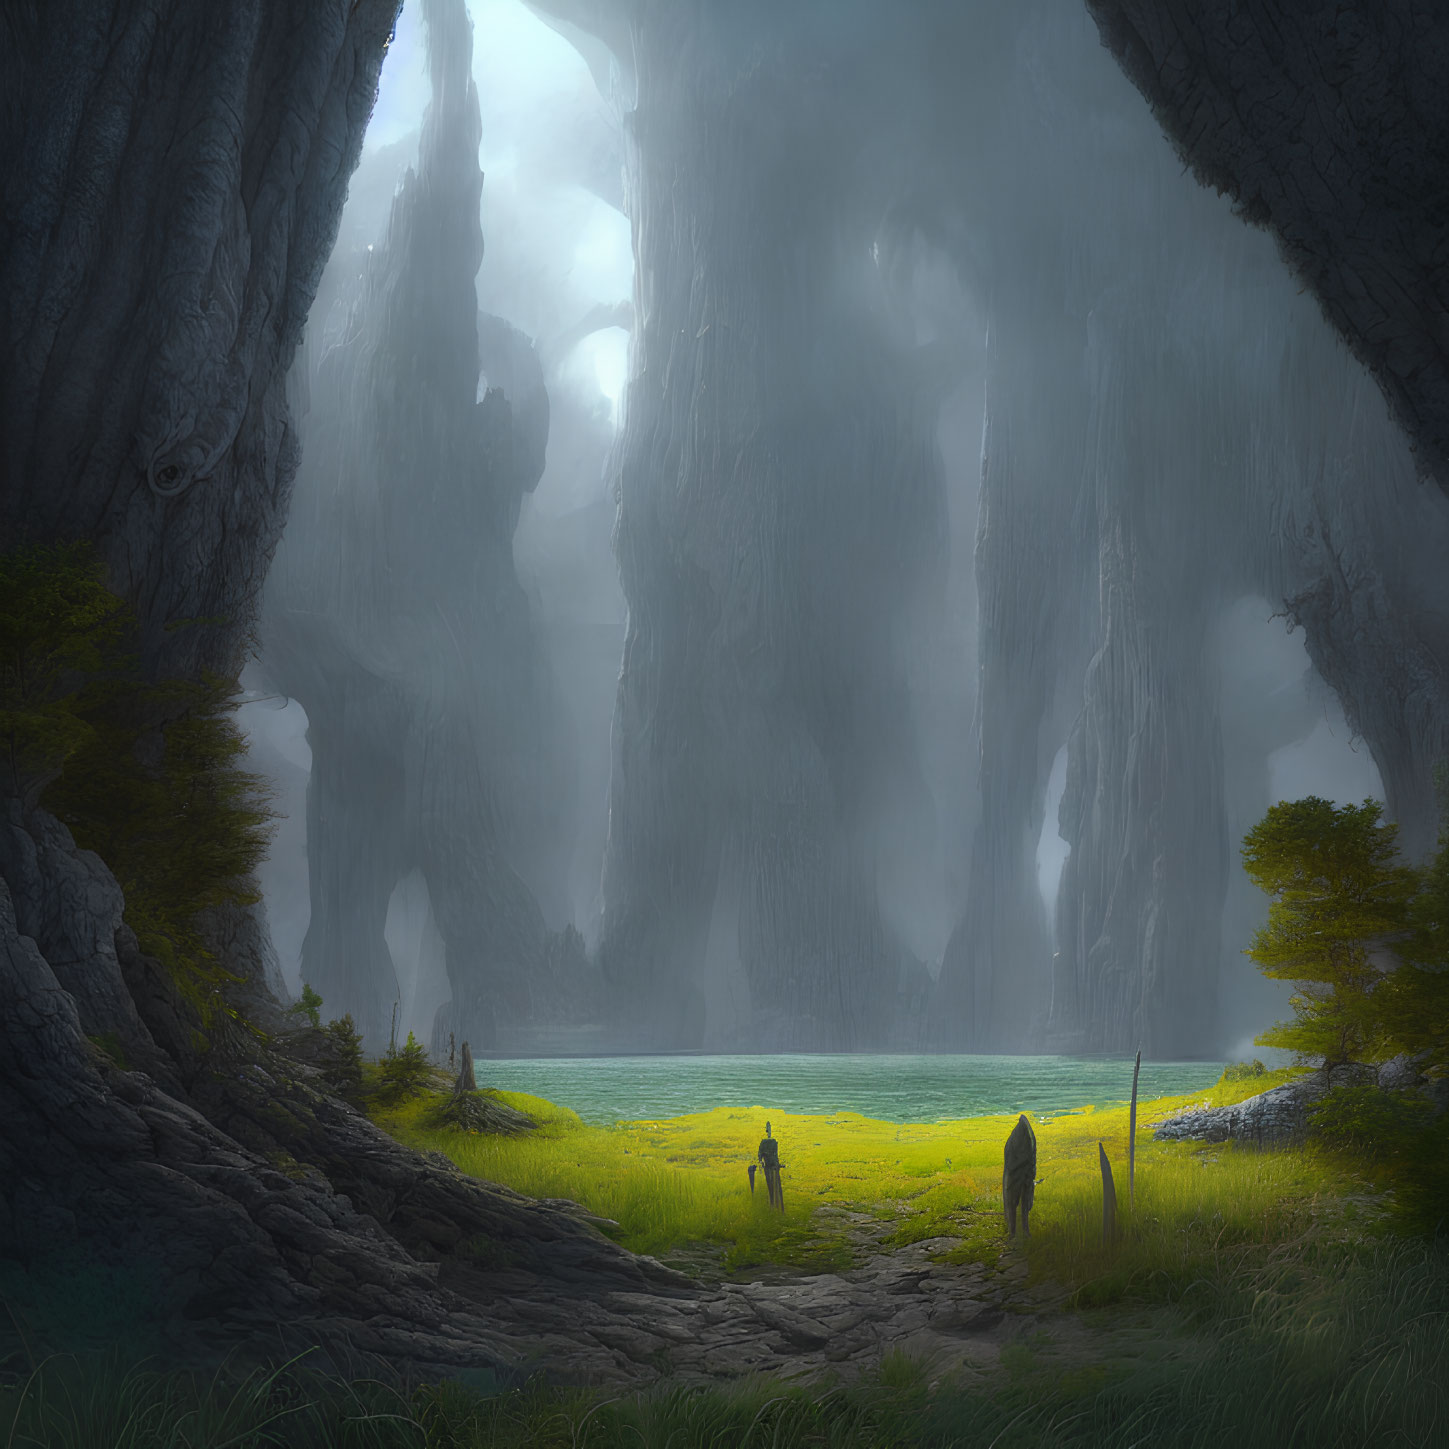 Two Figures in Vast Cavern with Tranquil Lake